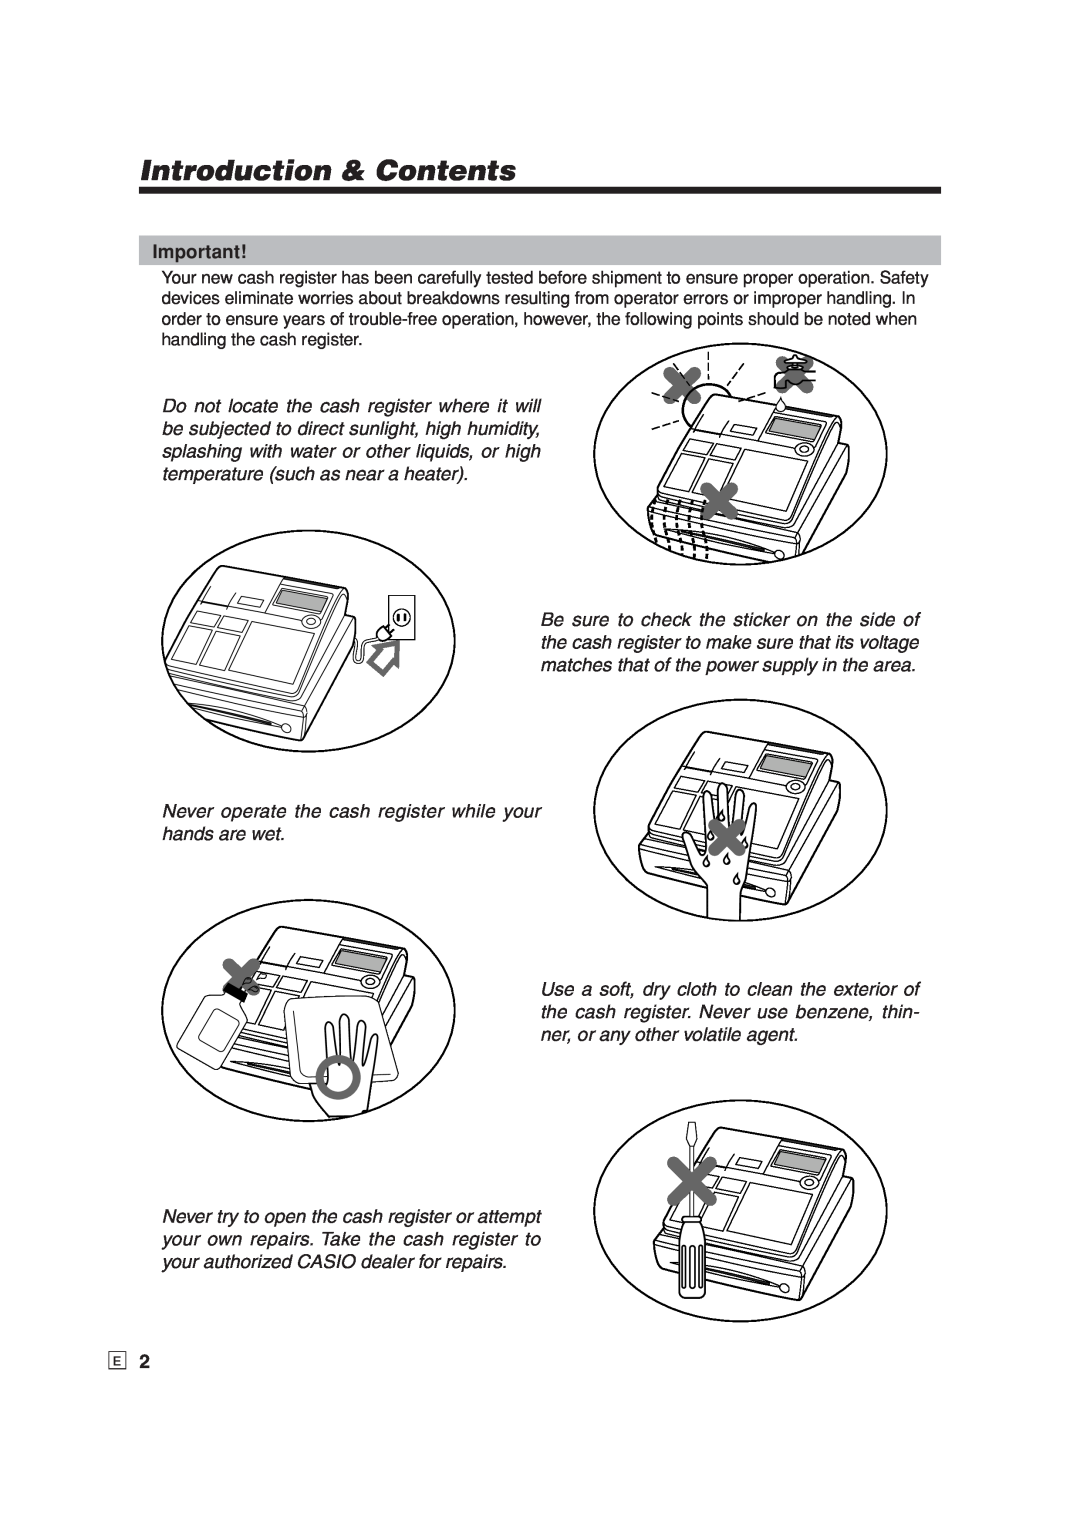 Casio SE-S6000, SE-C6000 user manual Introduction & Contents, Never operate the cash register while your hands are wet 